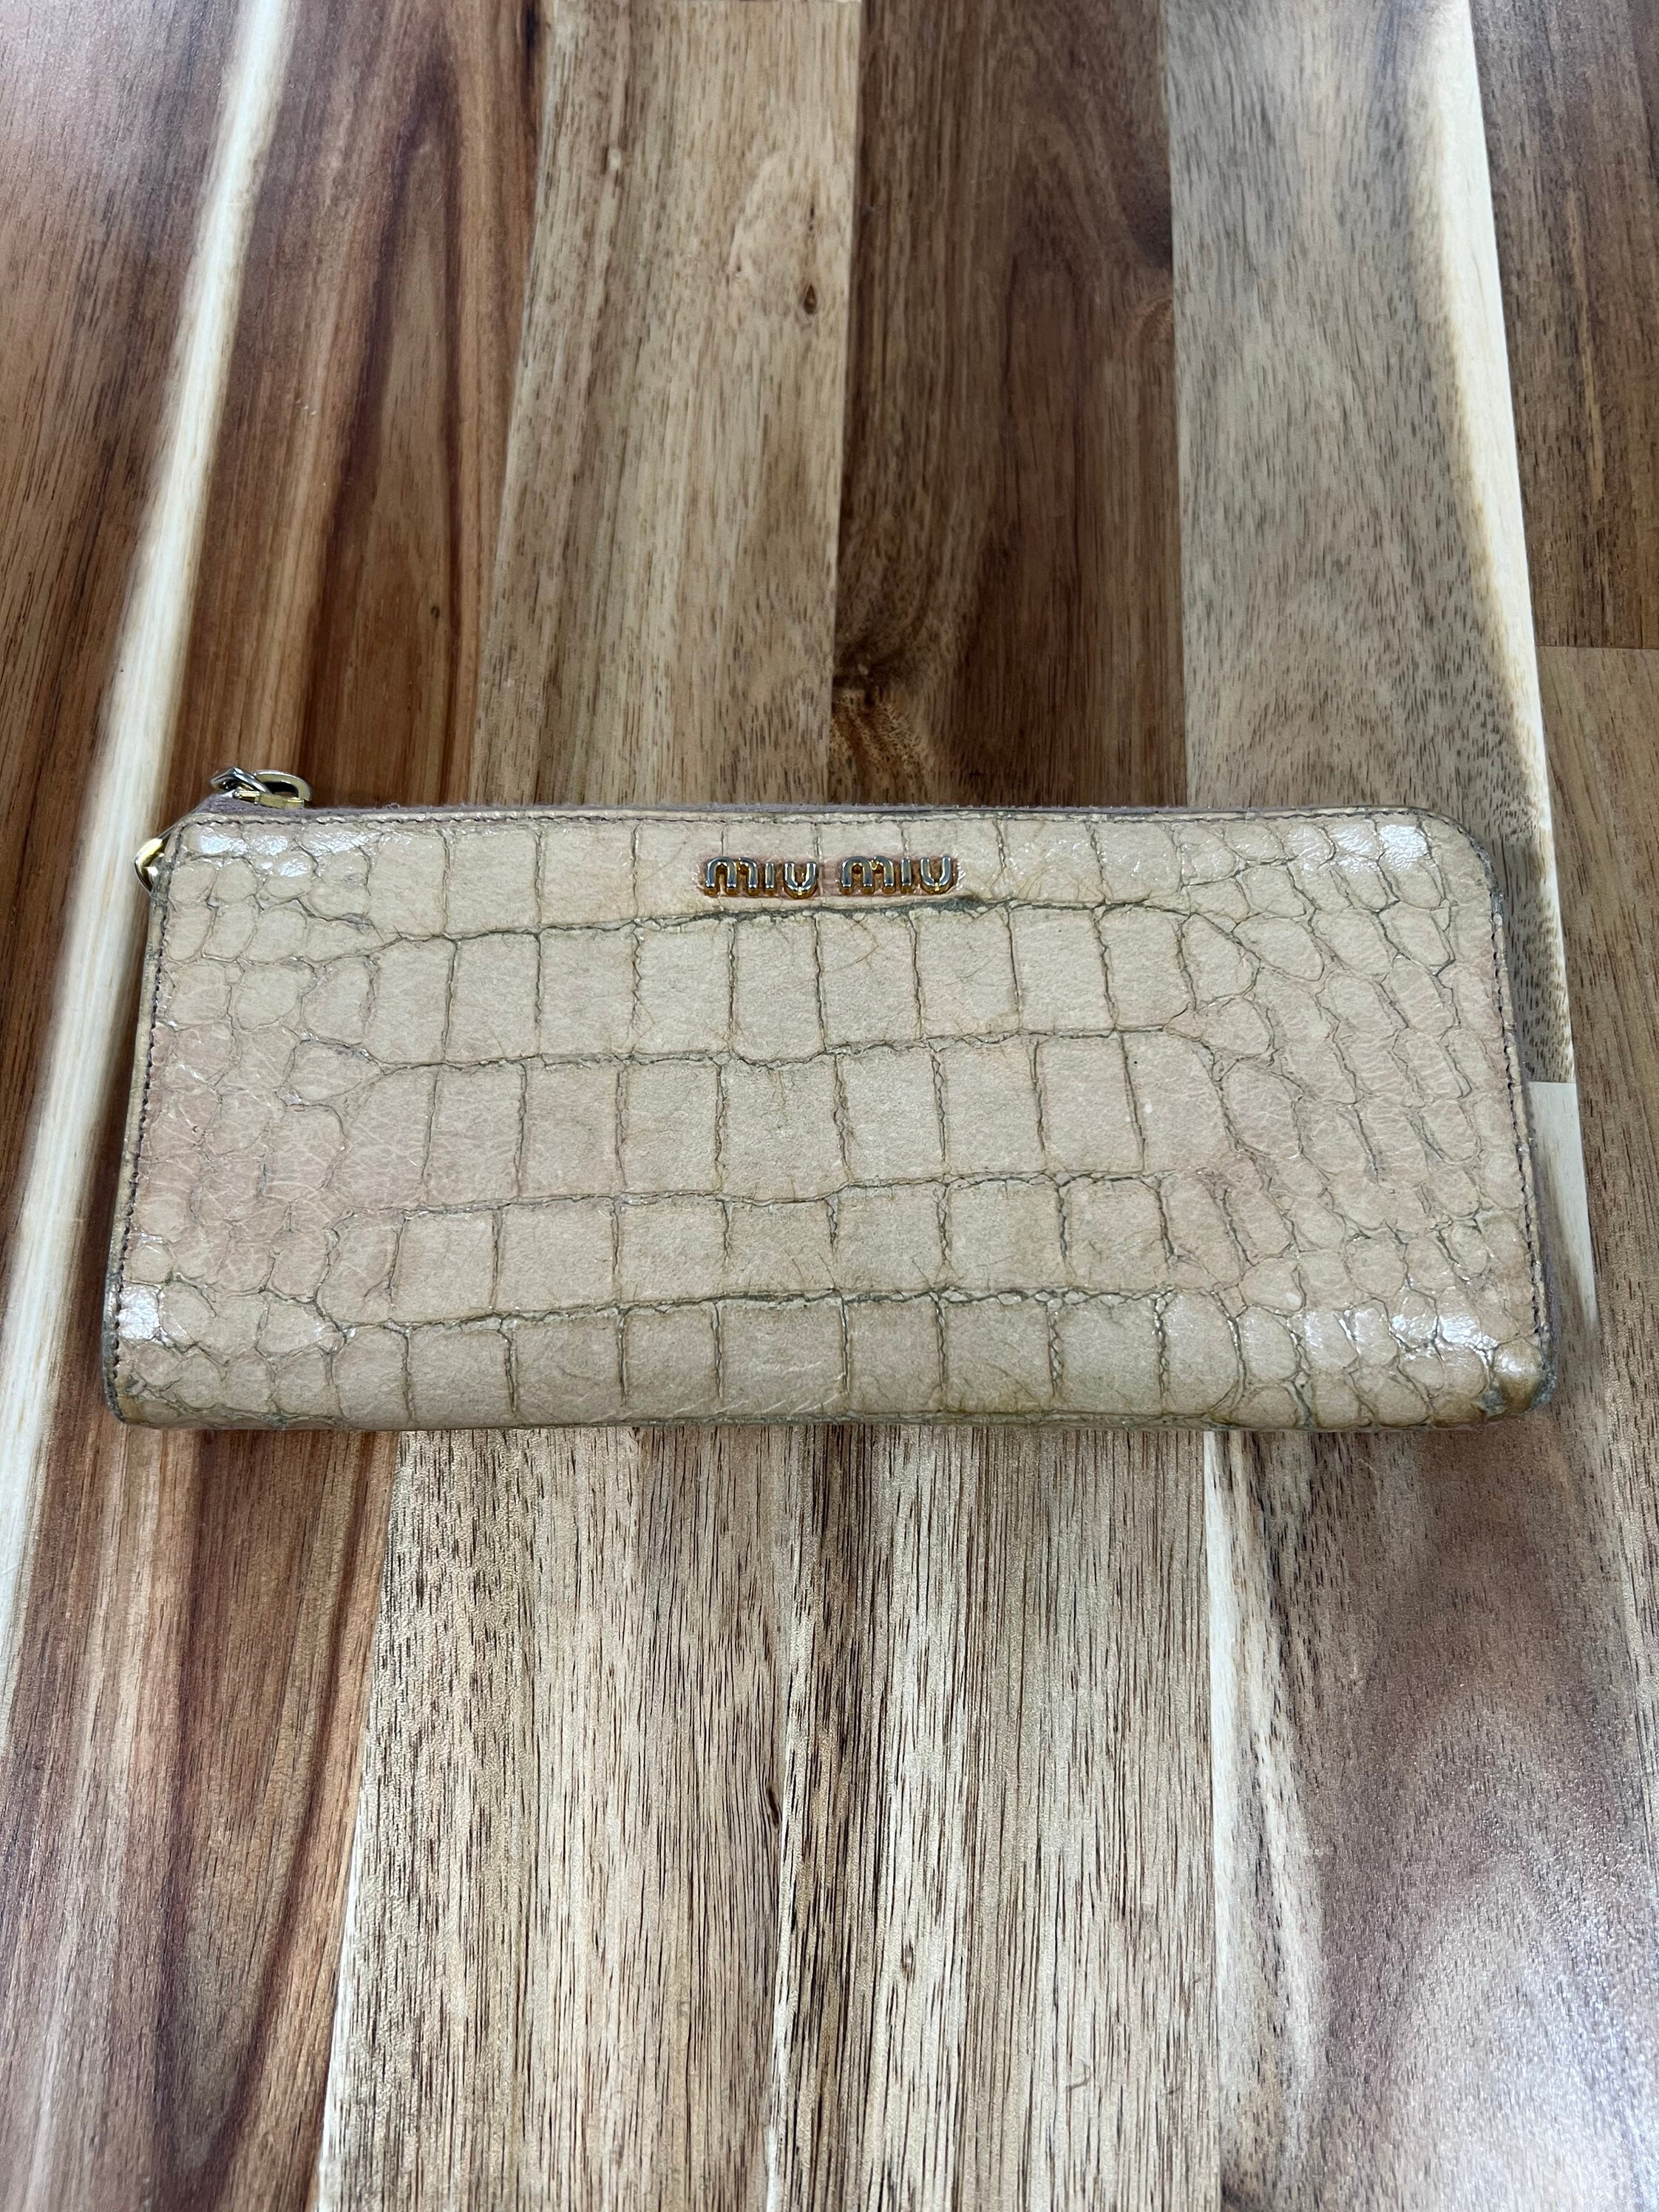 Prada Mini Pink Quilted Leather Wallet on Chain – I MISS YOU VINTAGE